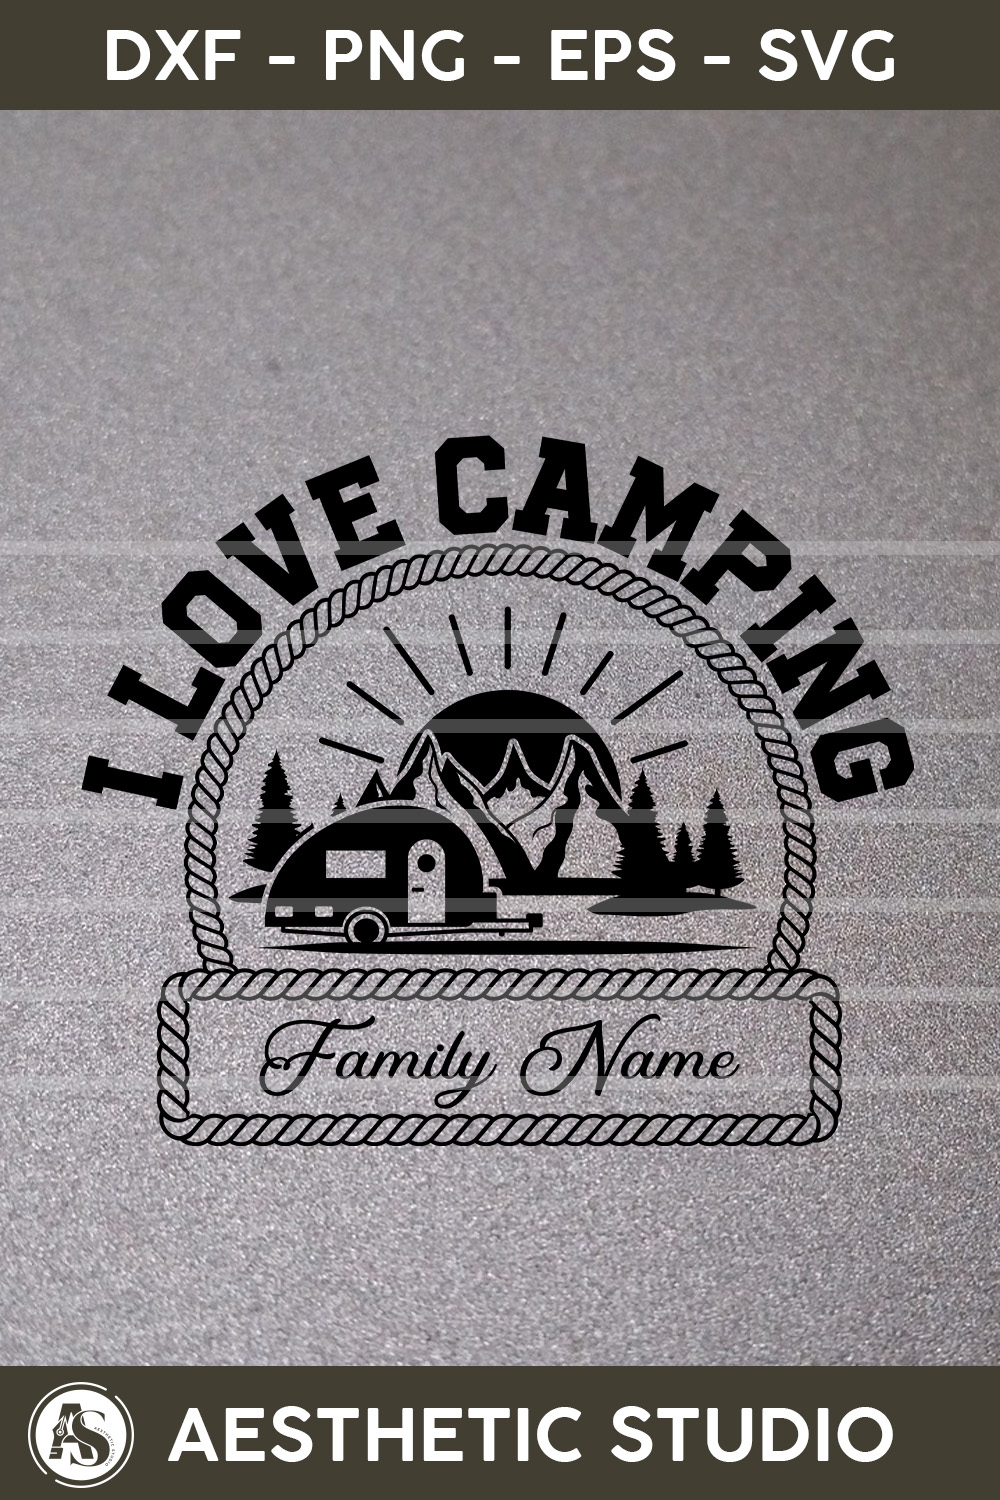 I Love Camping, Camper, Adventure, Camp Life, Camping Svg, Typography, Camping Quotes, Camping Cut File, Funny Camping, Camping T-shirt Design, Svg, Eps, Dxf, Png, Cut file pinterest preview image.